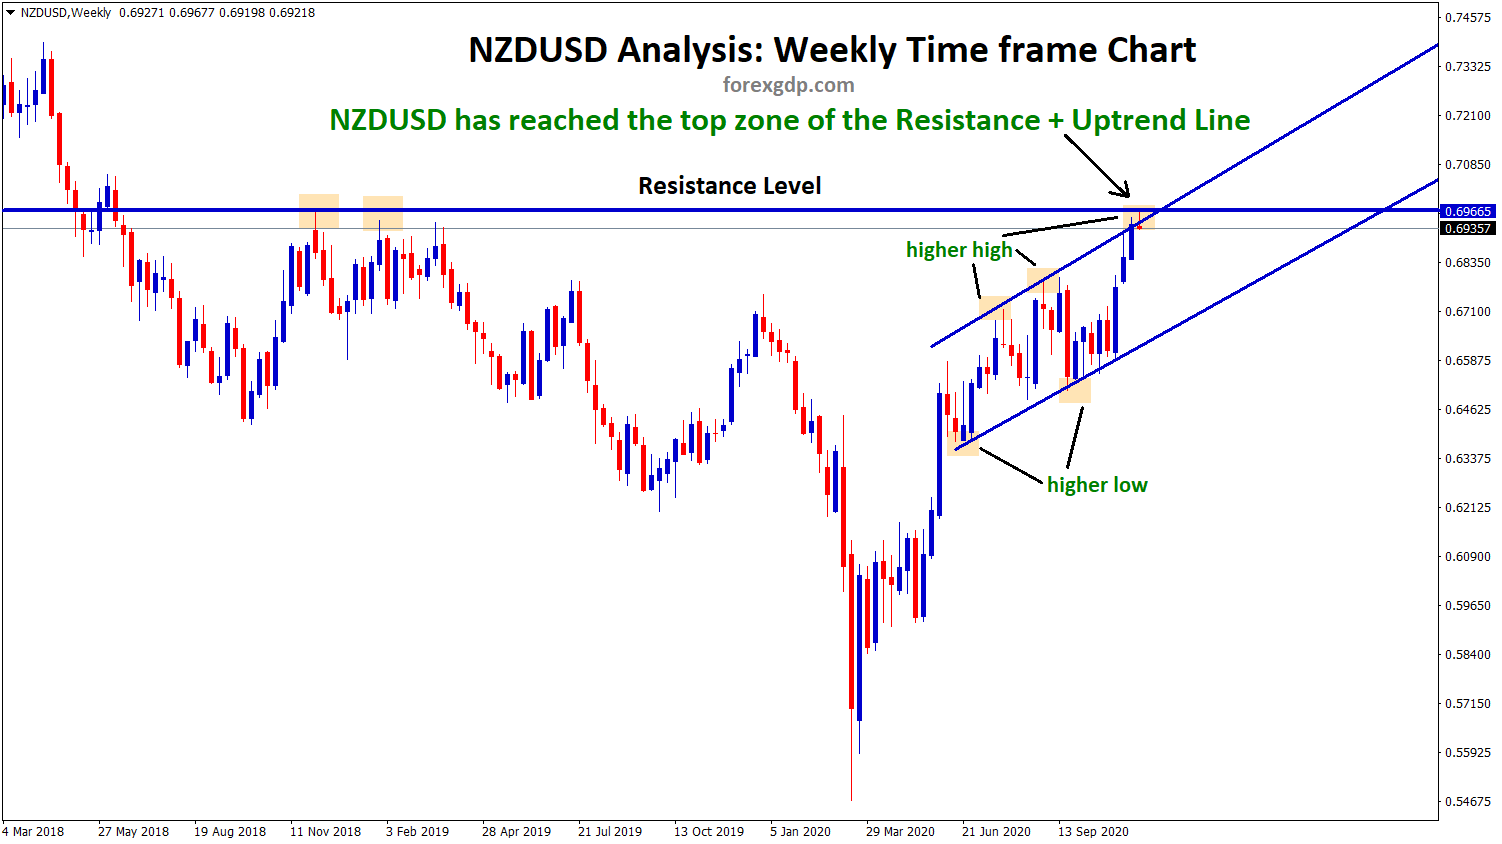 NZDUSD reached the top of the resistance and uptrend line